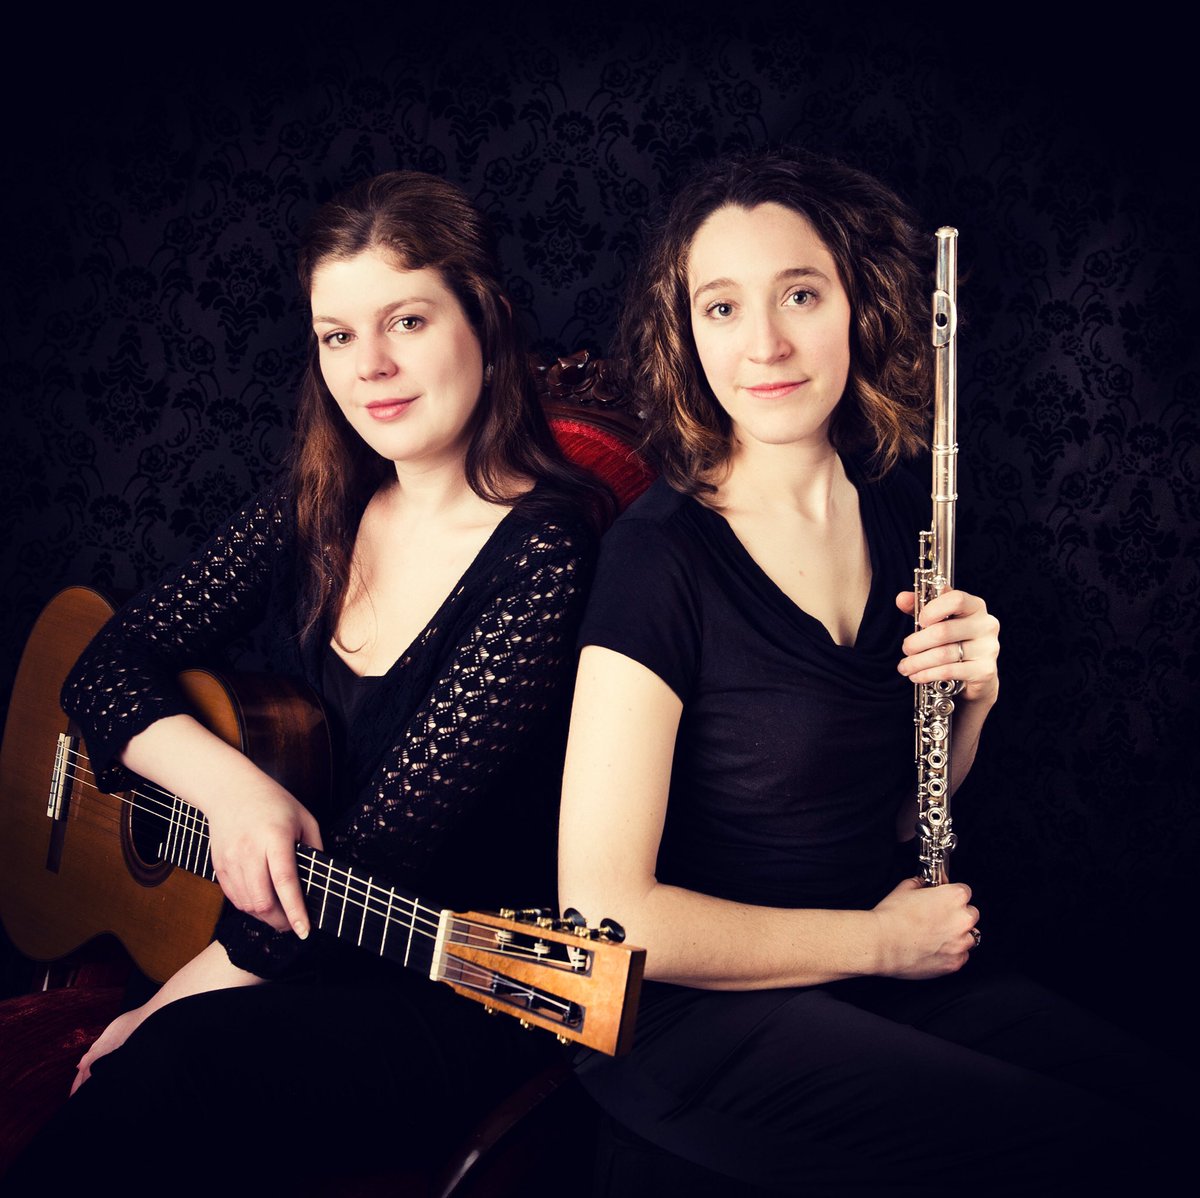 Today is 8 years since our first concert! #fluteandguitar